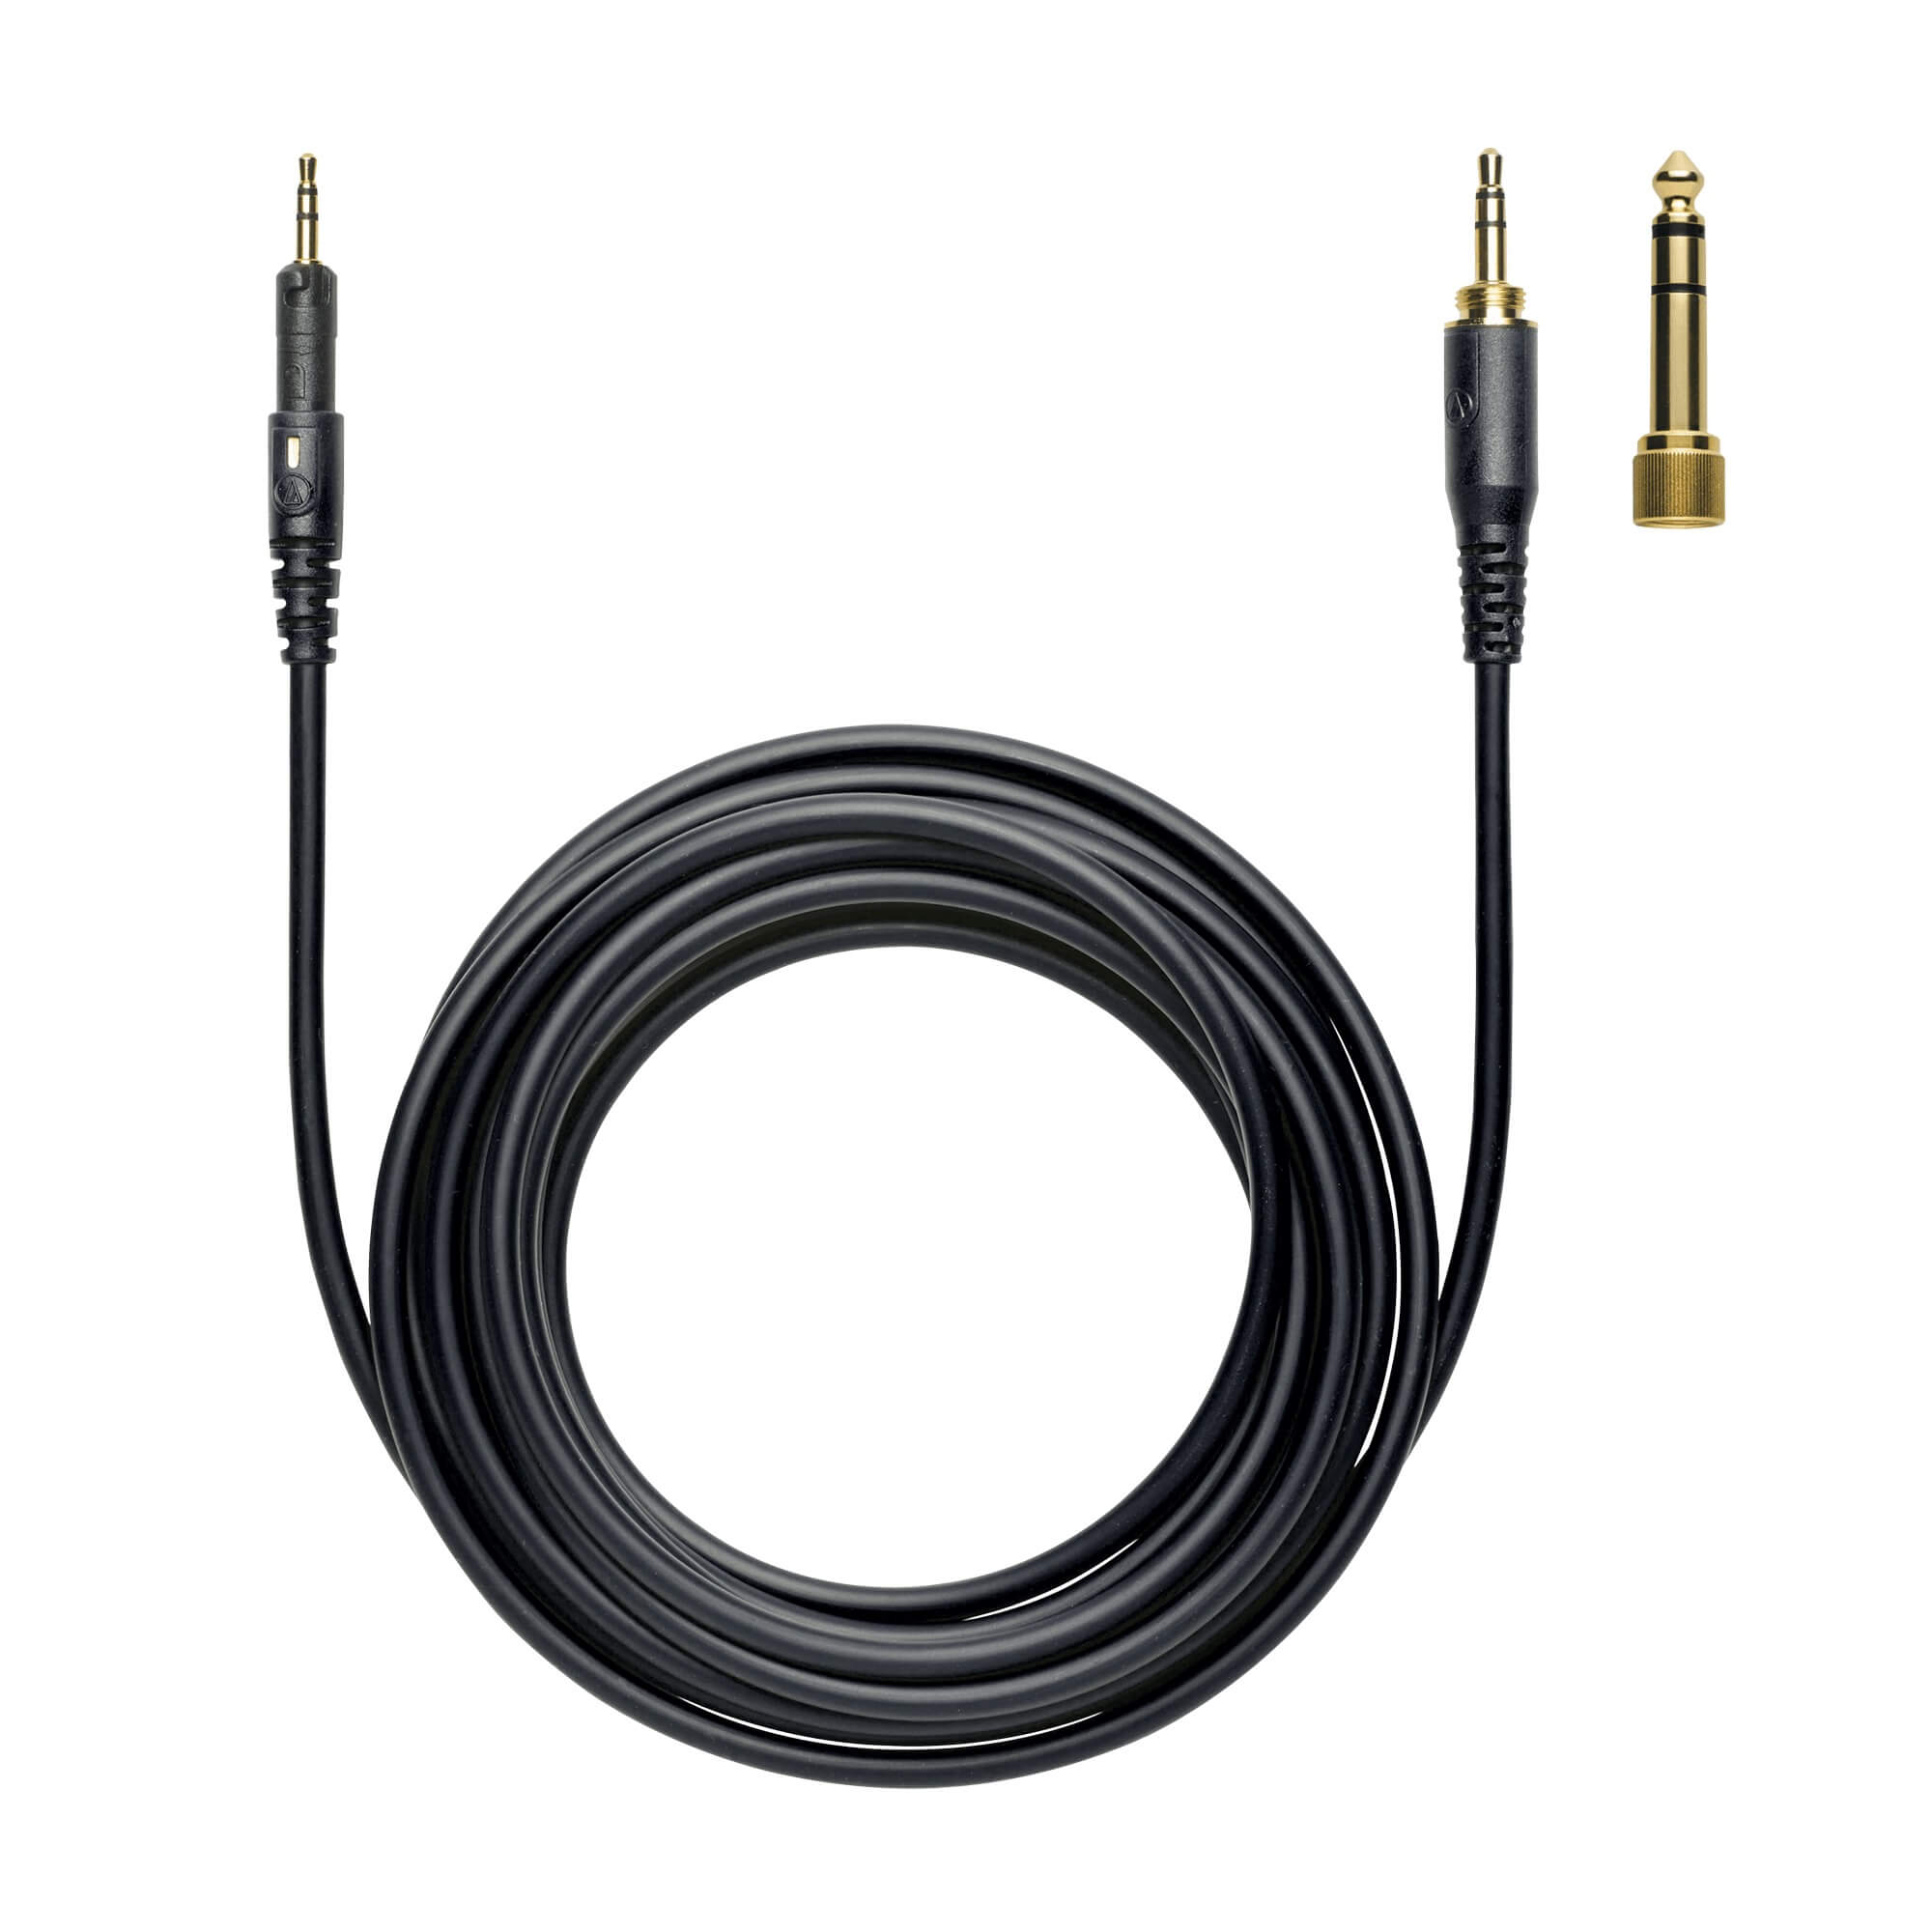 Audio-Technica ATH-M70x Professional Monitor Headphones, included 3m straight cable and adapter